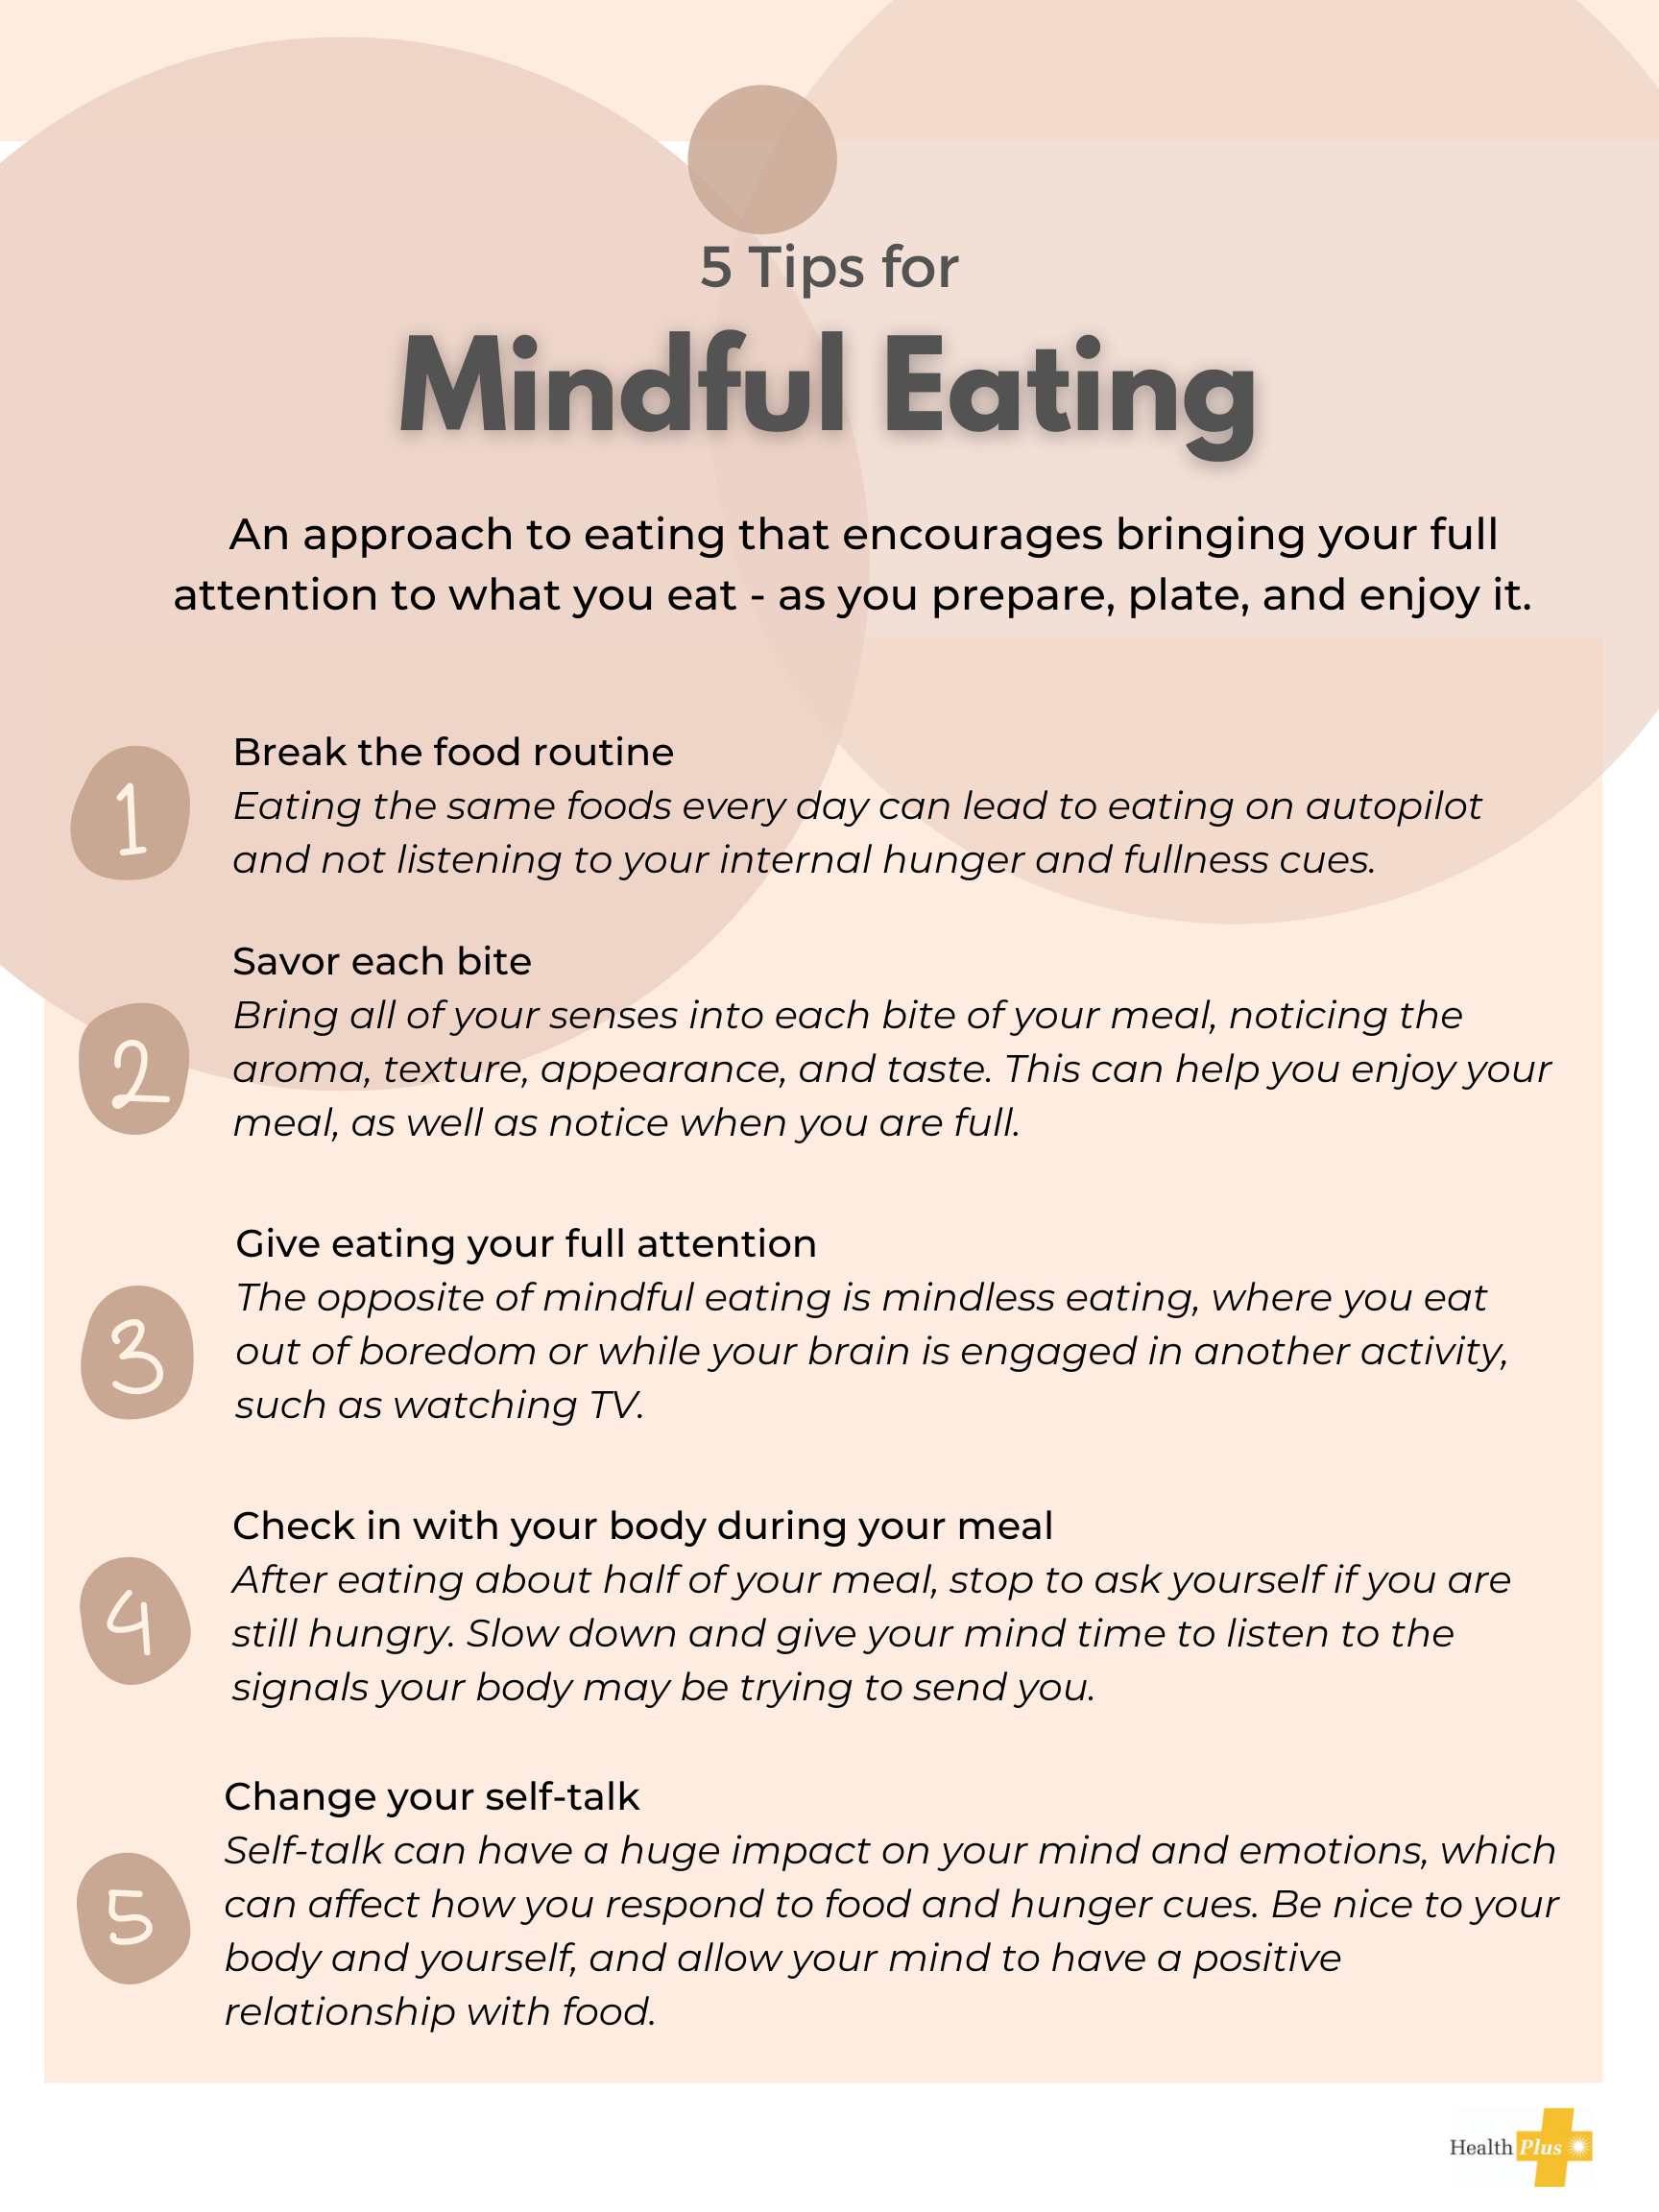 Mindful eating and mindful self-care